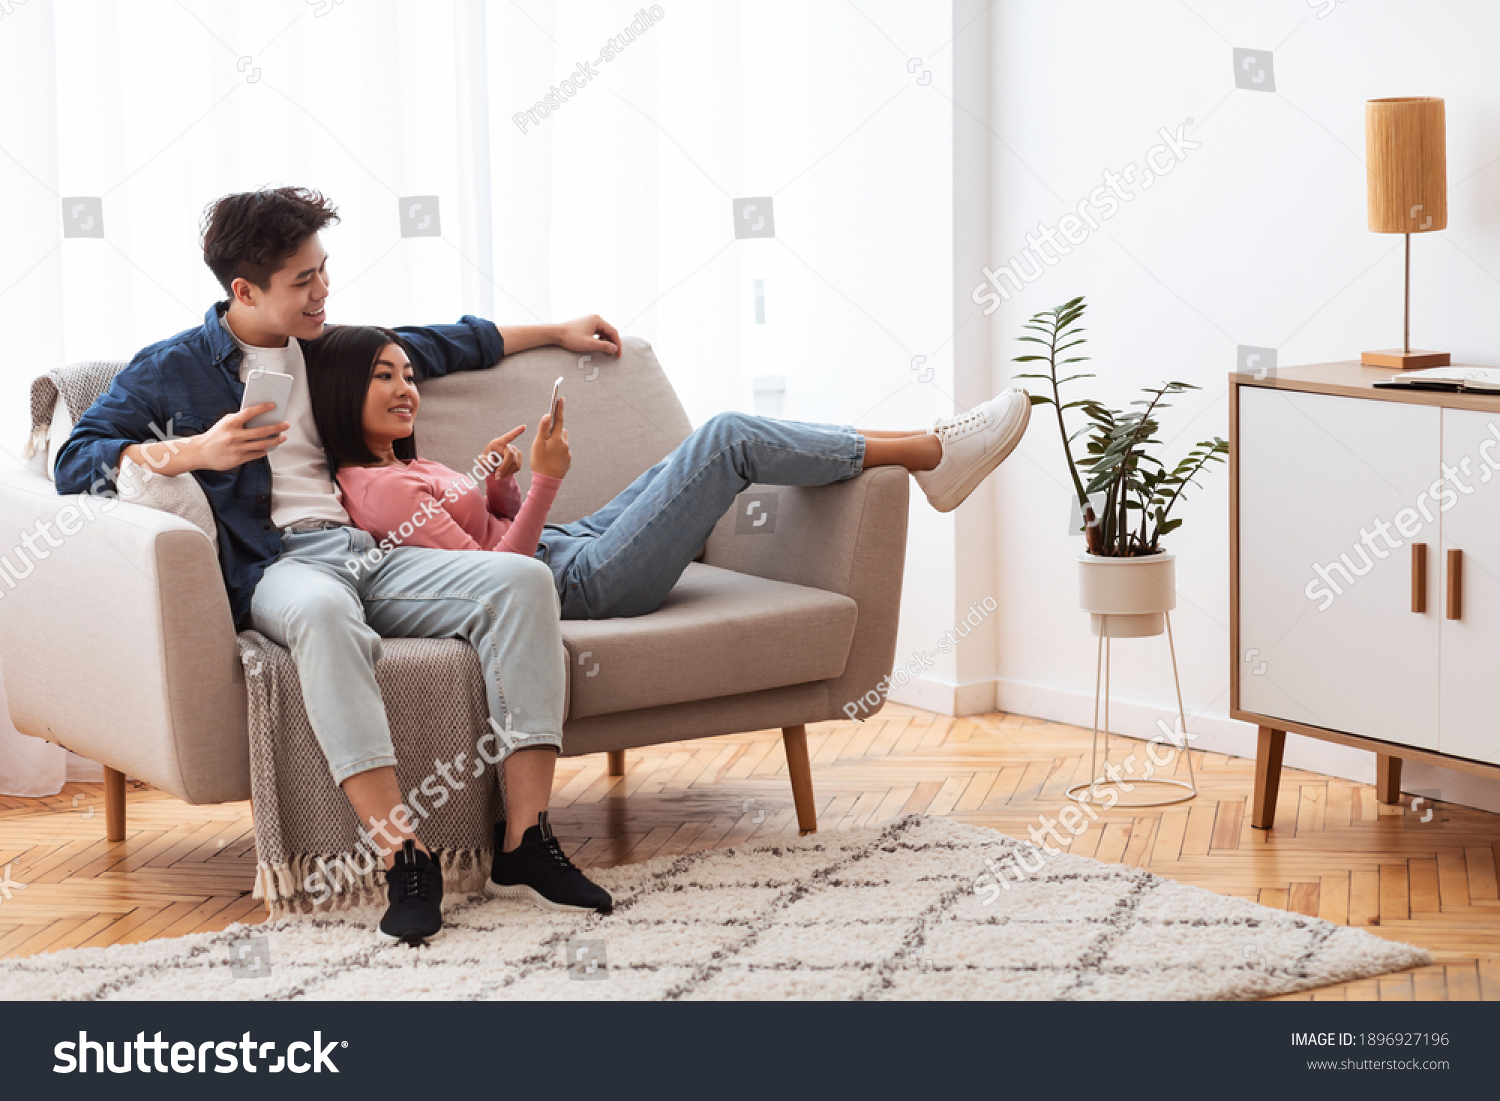 Japanese Couple Using Cellphones Texting And Browsing Internet Relaxing Sitting On Couch Indoor. Weekend Leisure. Happy And Relaxed Asian Family Using Mobile Application Resting At Home #1896927196